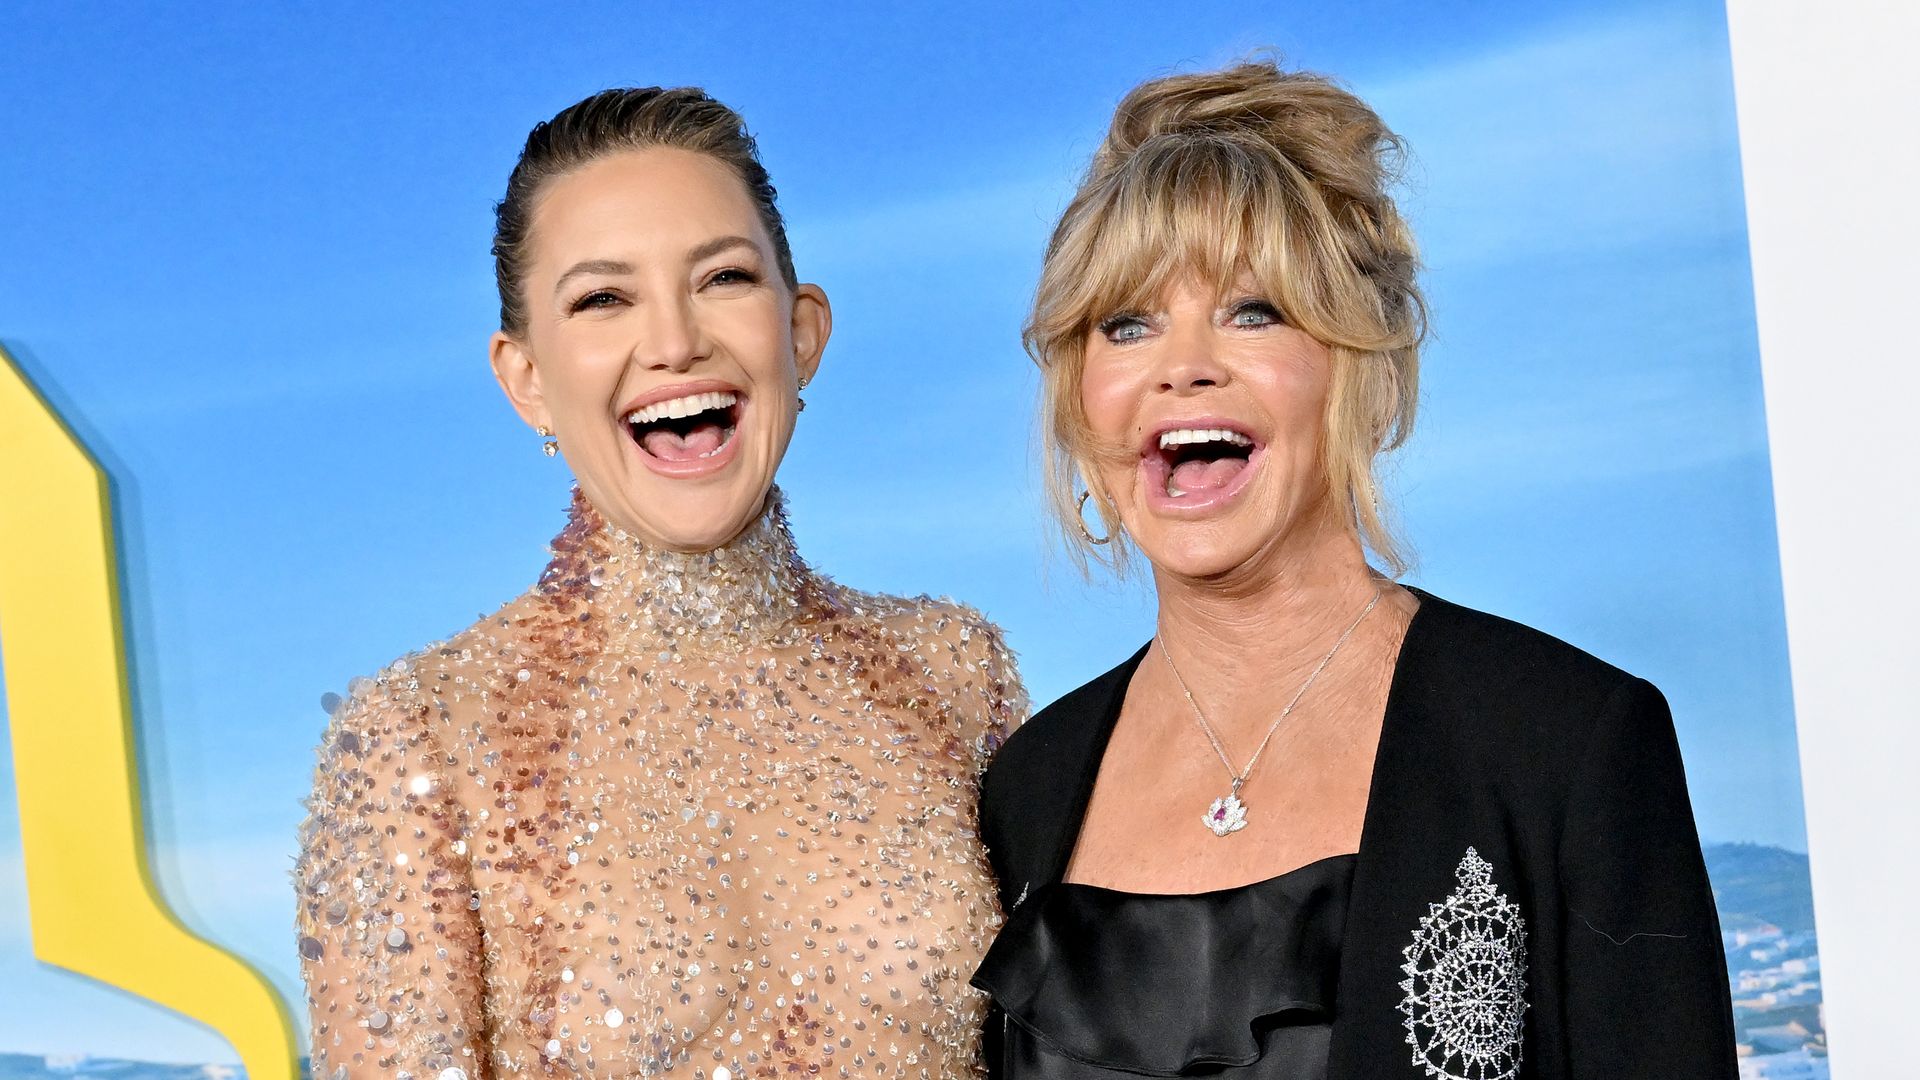 Kate Hudson and Goldie Hawn's on the red carpet for Glass Onion 